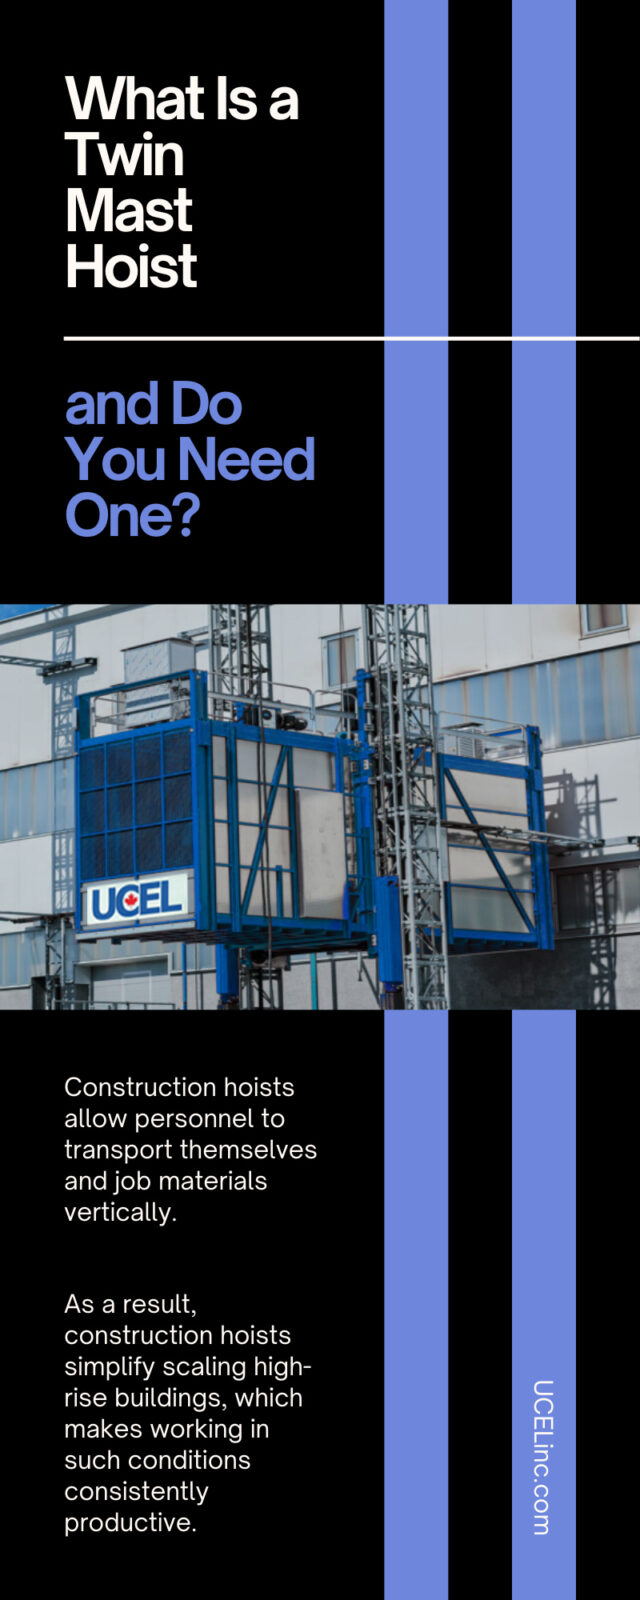 What Is a Twin Mast Hoist and Do You Need One?